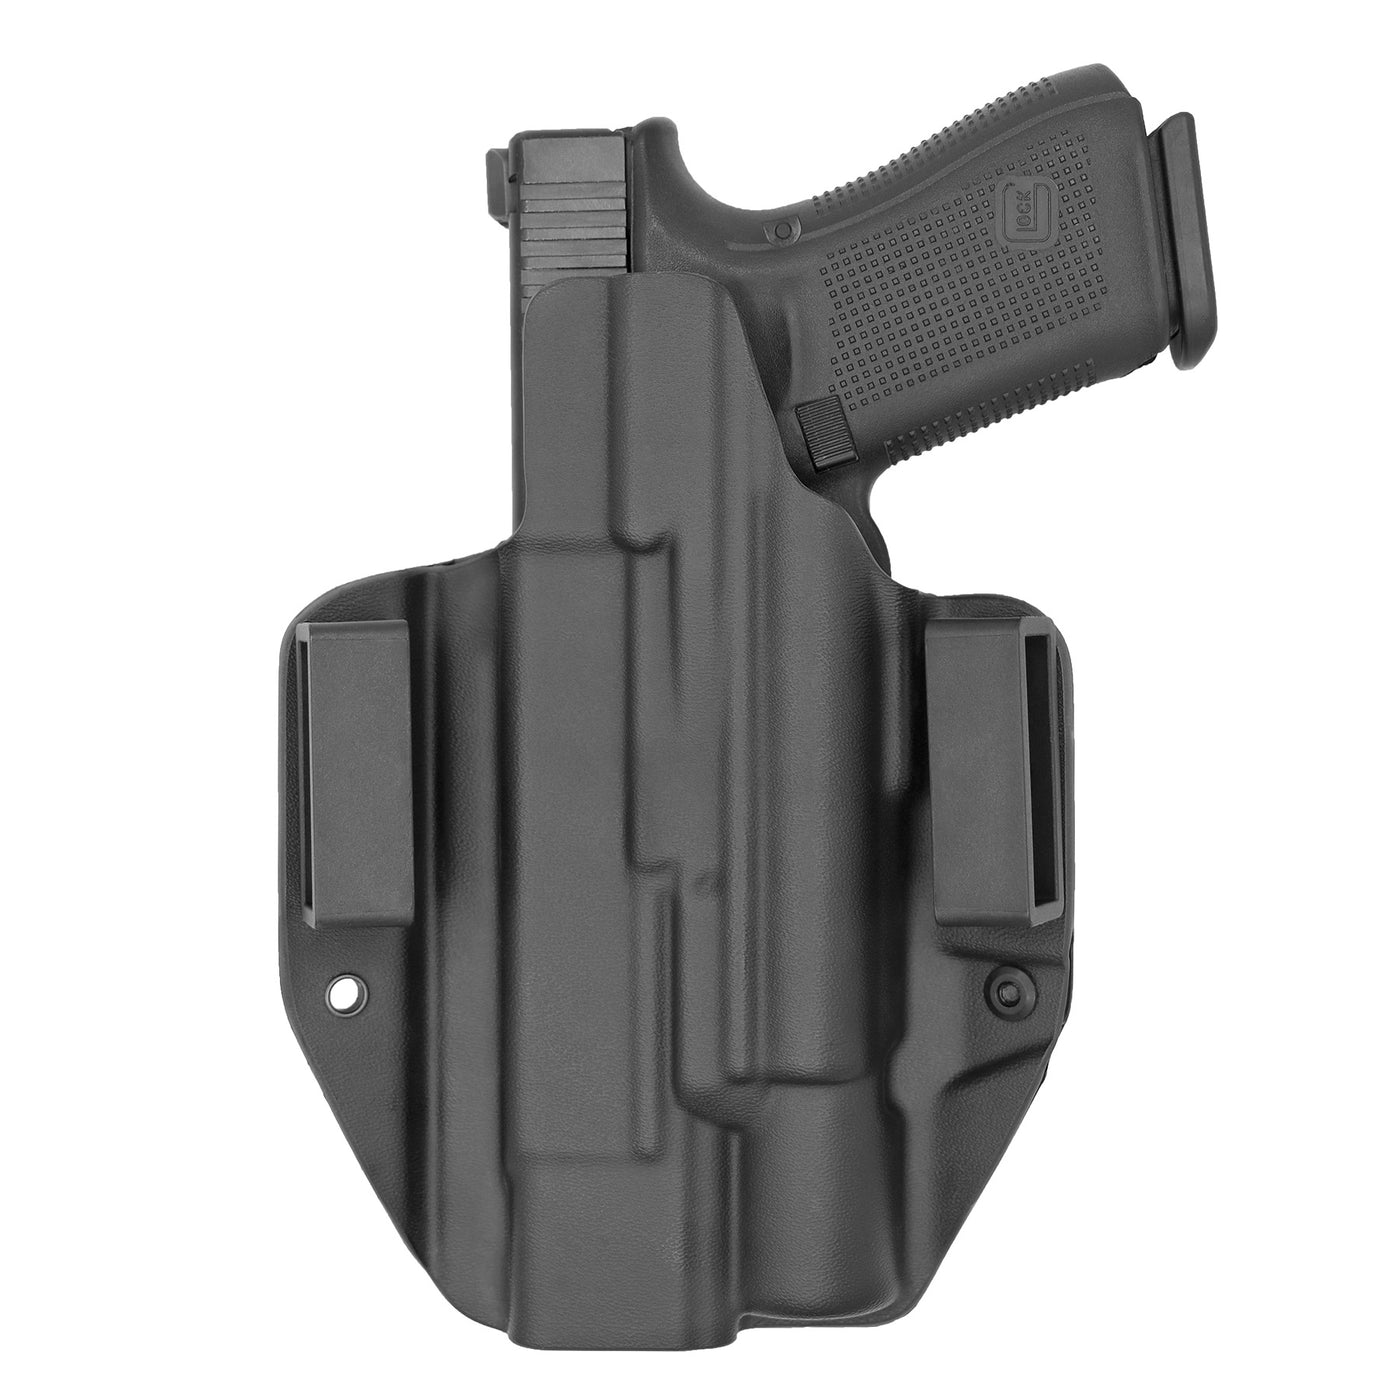 C&G Holsters Custom OWB Tactical Glock X300 in holstered position back view